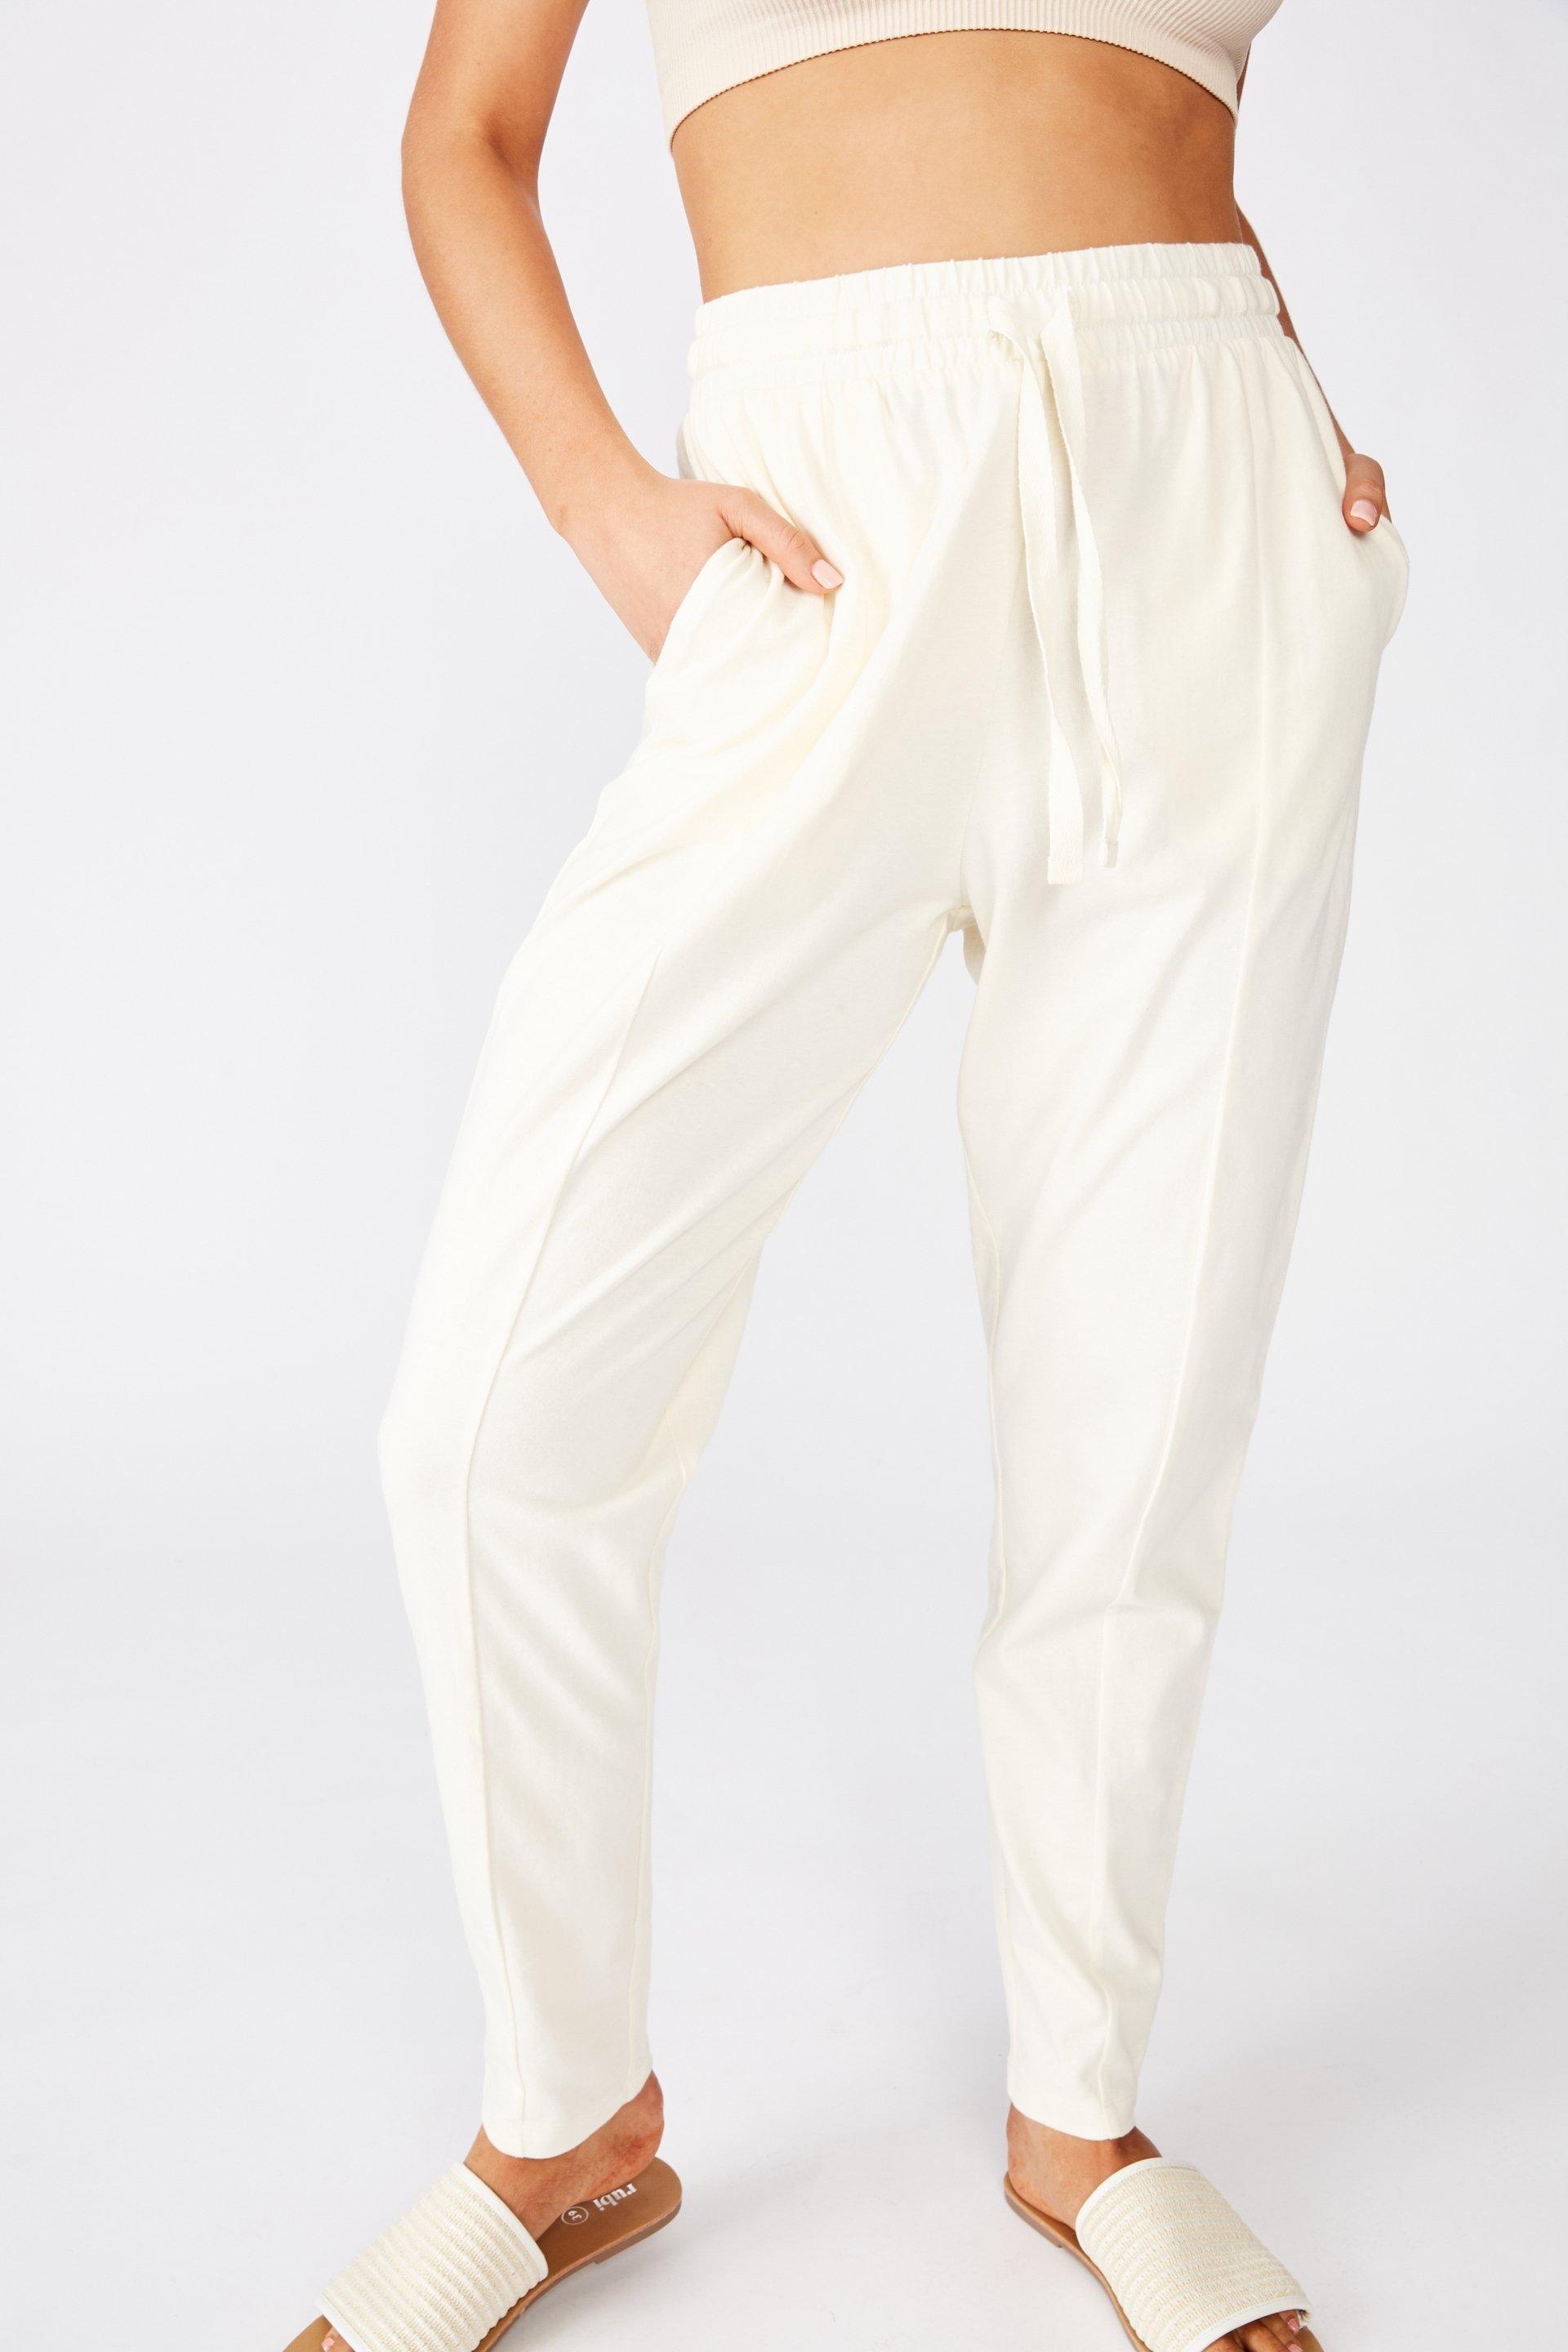 Relaxed lounge pants - cream Cotton On Trousers | Superbalist.com